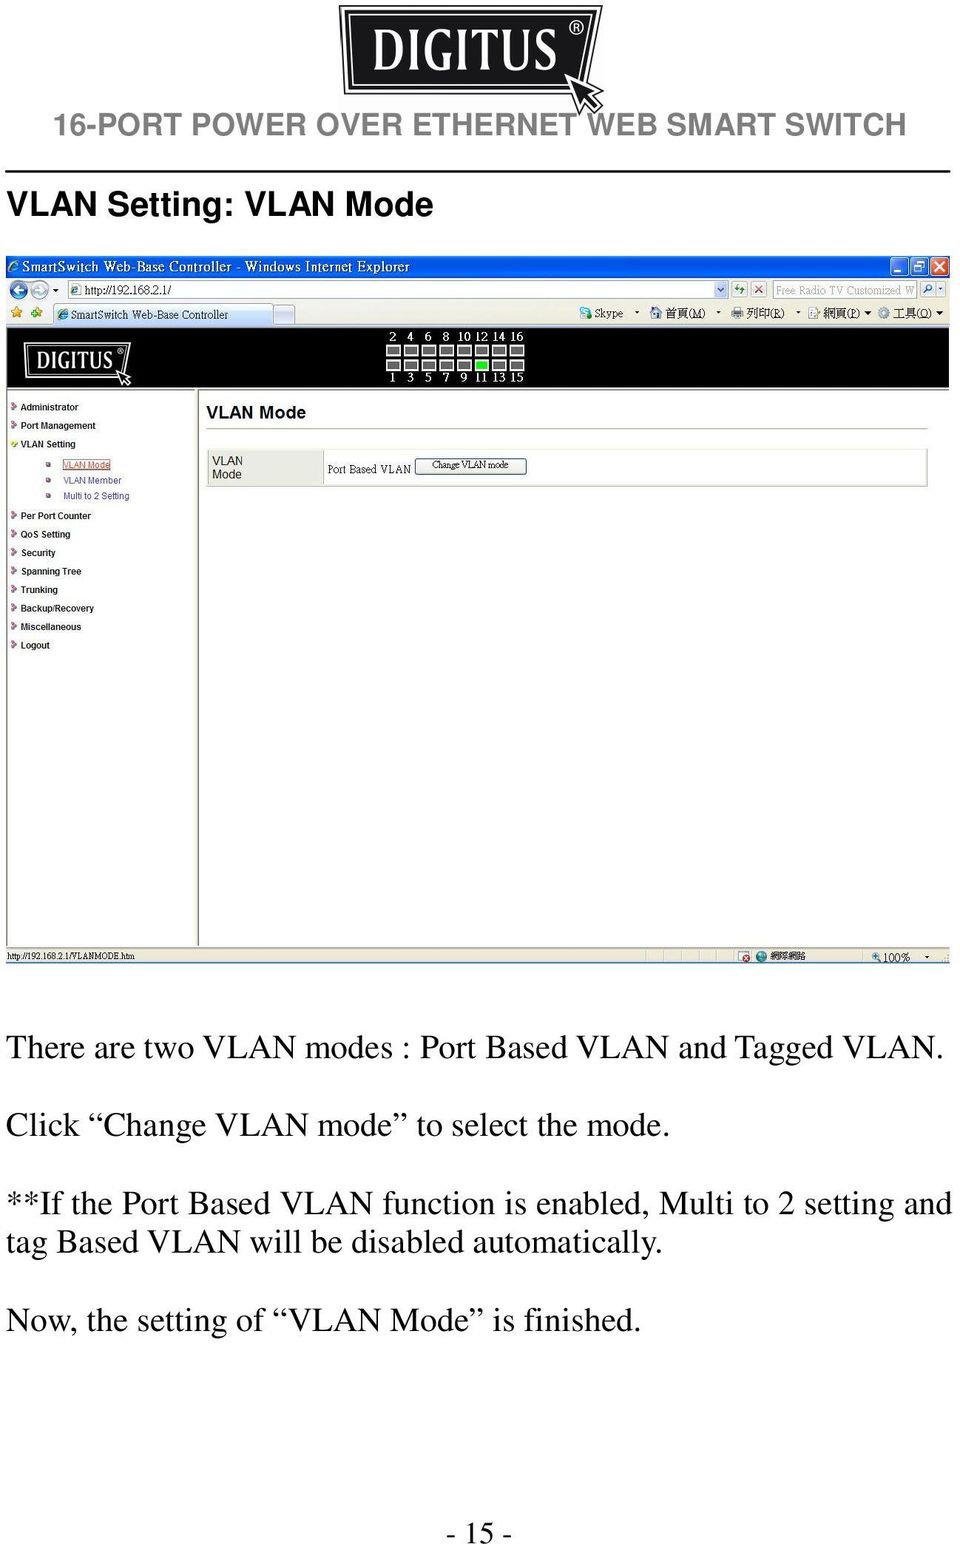 **If the Port Based VLAN function is enabled, Multi to 2 setting and tag